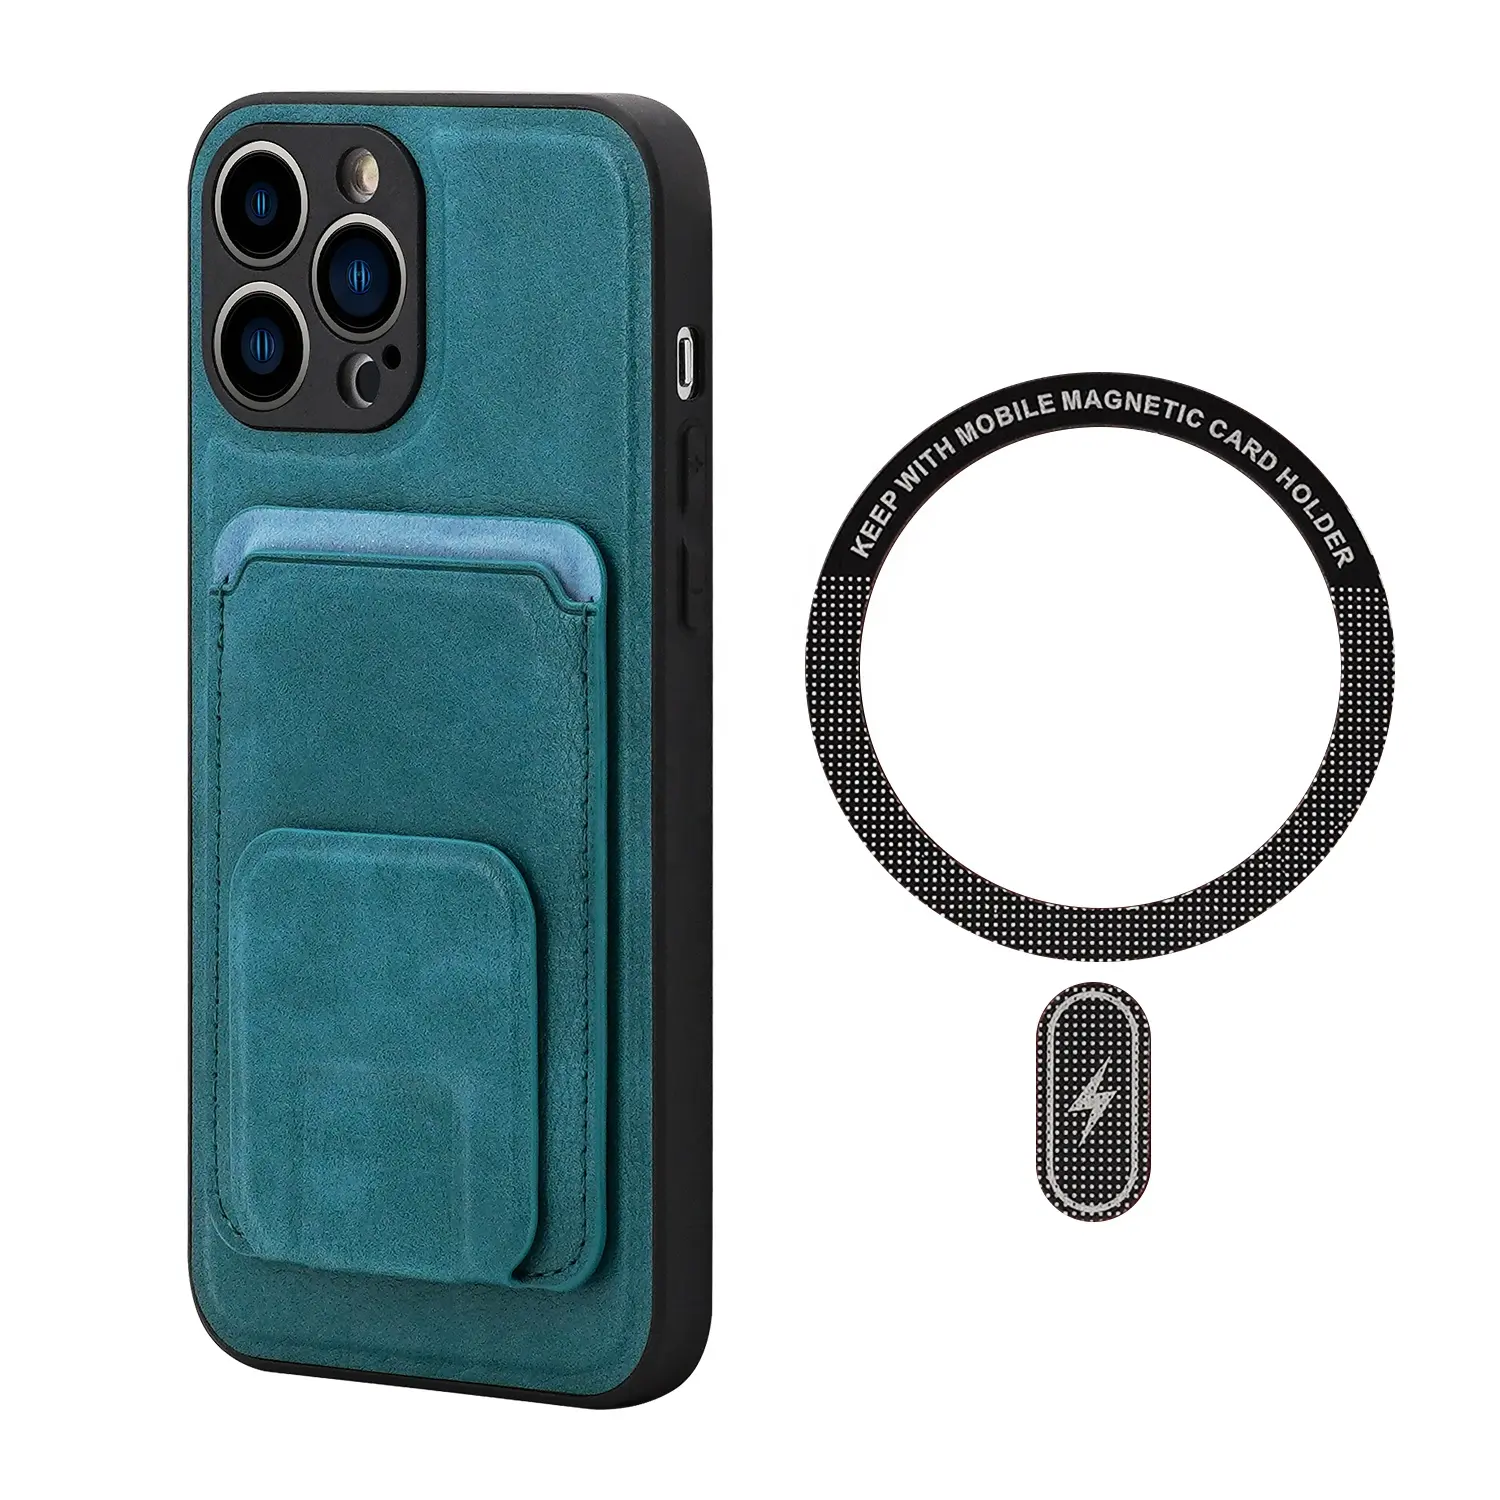 NEW Hot sale wireless charging PU Leather case with Magnetic wallet card holder For IPHONE 13 14 PRO MAX SAMSUNG XIAOMI HUAWEI